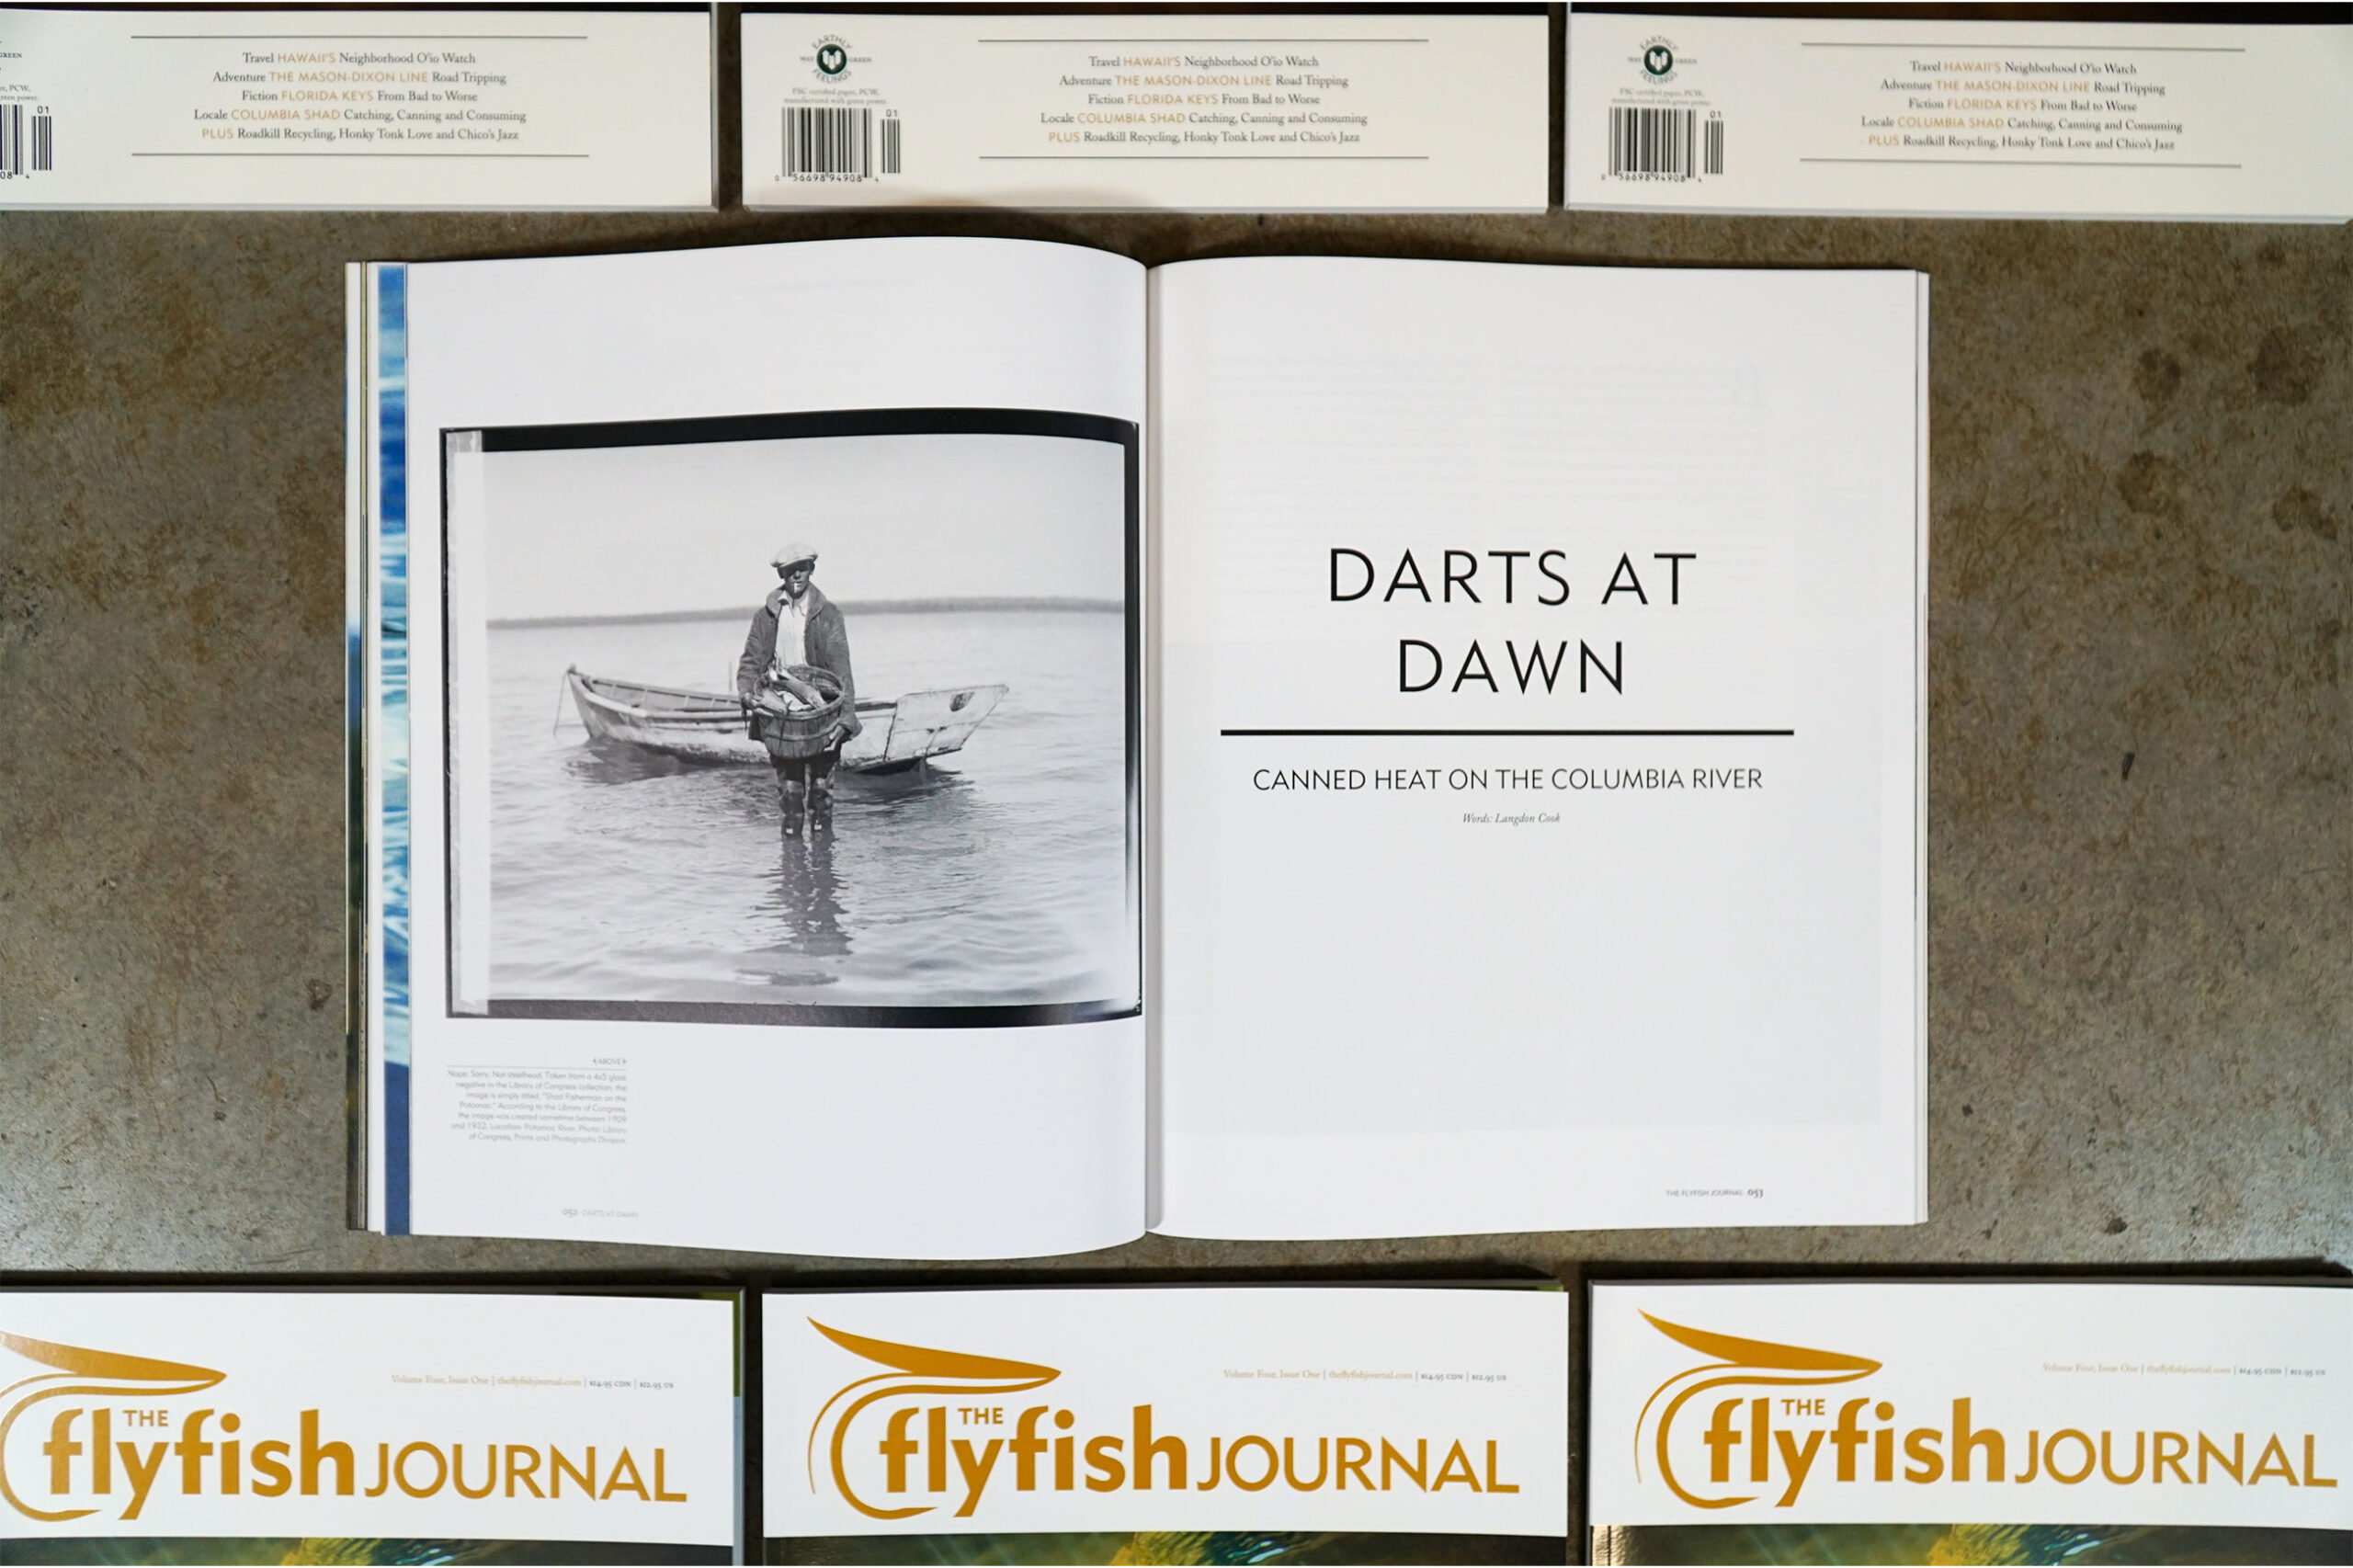 The Flyfish Journal Volume 4 Issue 1 Feature Darts at Dawn